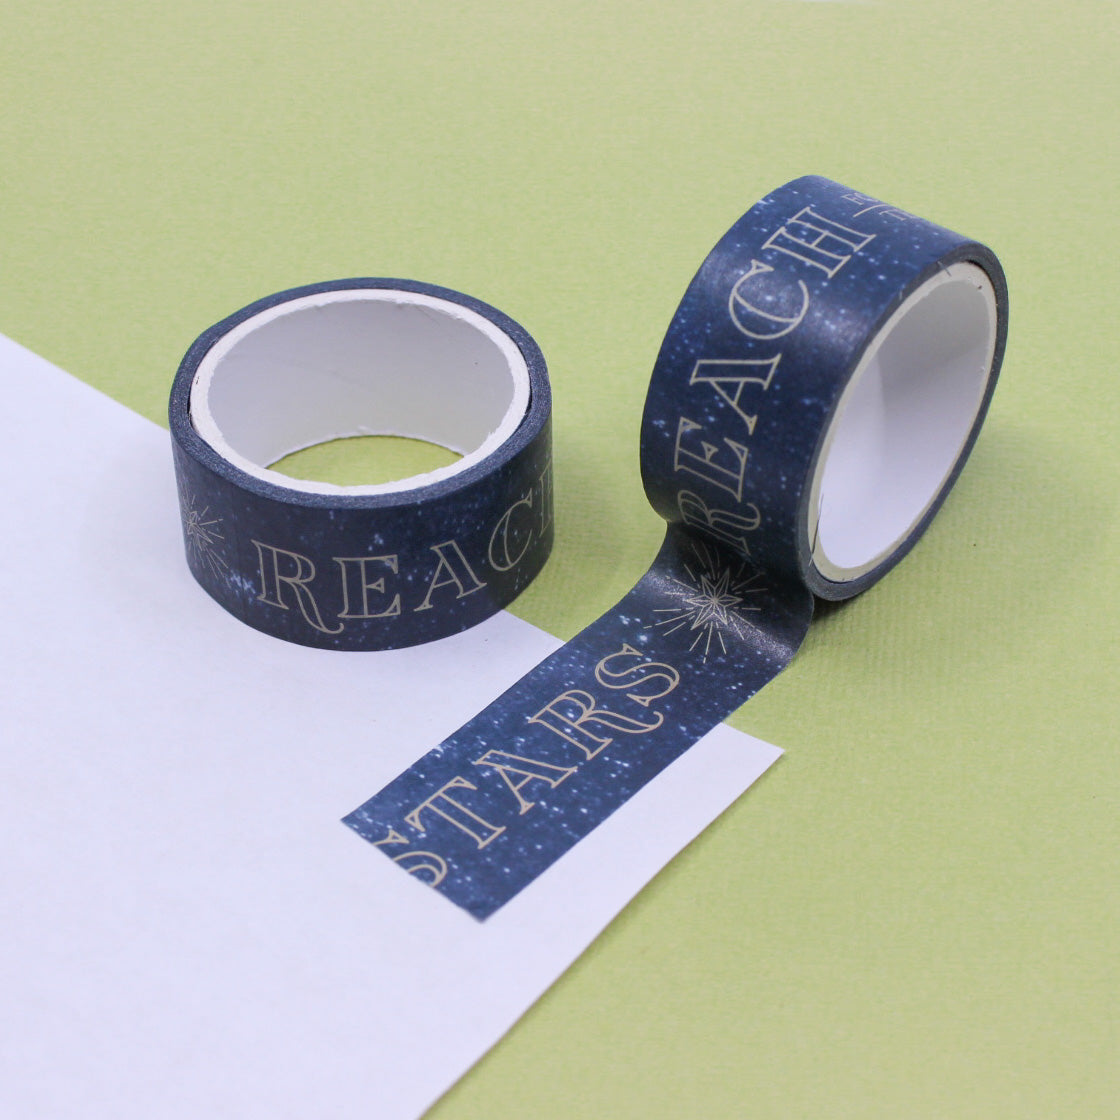  Reach for the Stars Washi Tape: Inspire your creativity with this celestial-themed washi tape featuring stars and constellations. Perfect for adding a dreamy touch to your journals, scrapbooks, or planners. This tape is sold at BBB Supplies Craft Shop.